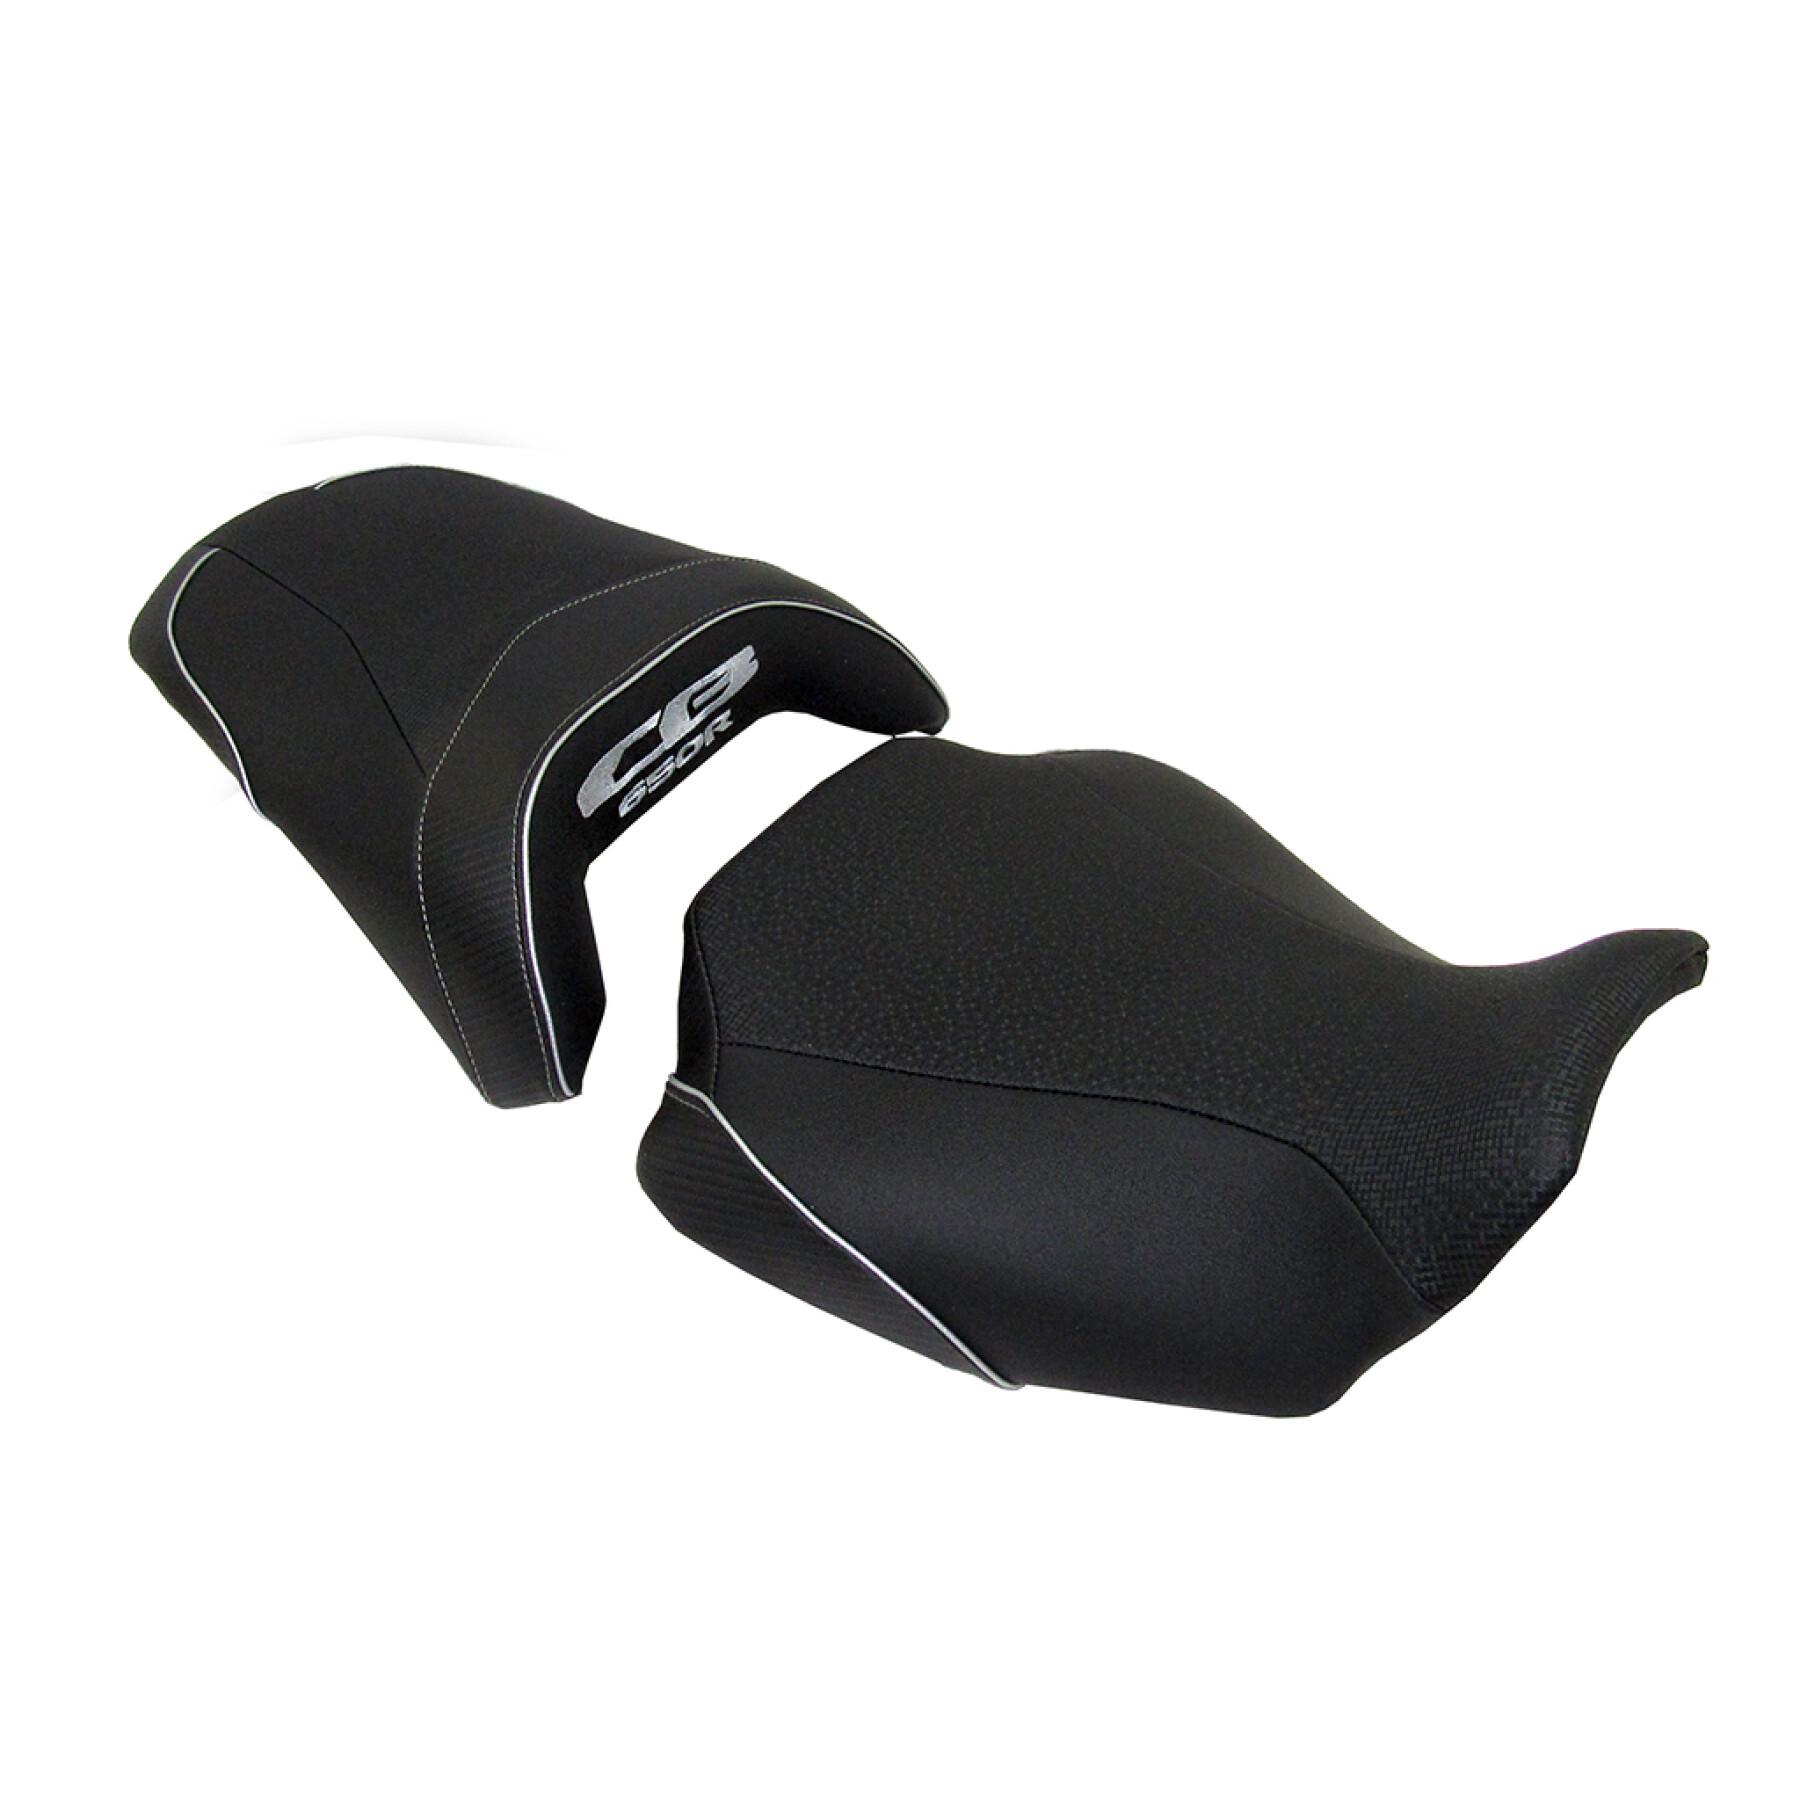 Motorcycle saddle with bultex foam option for the 2 Bagster Ready Luxe HONDA CB 650 R/CBR 650 R - 2019/2020